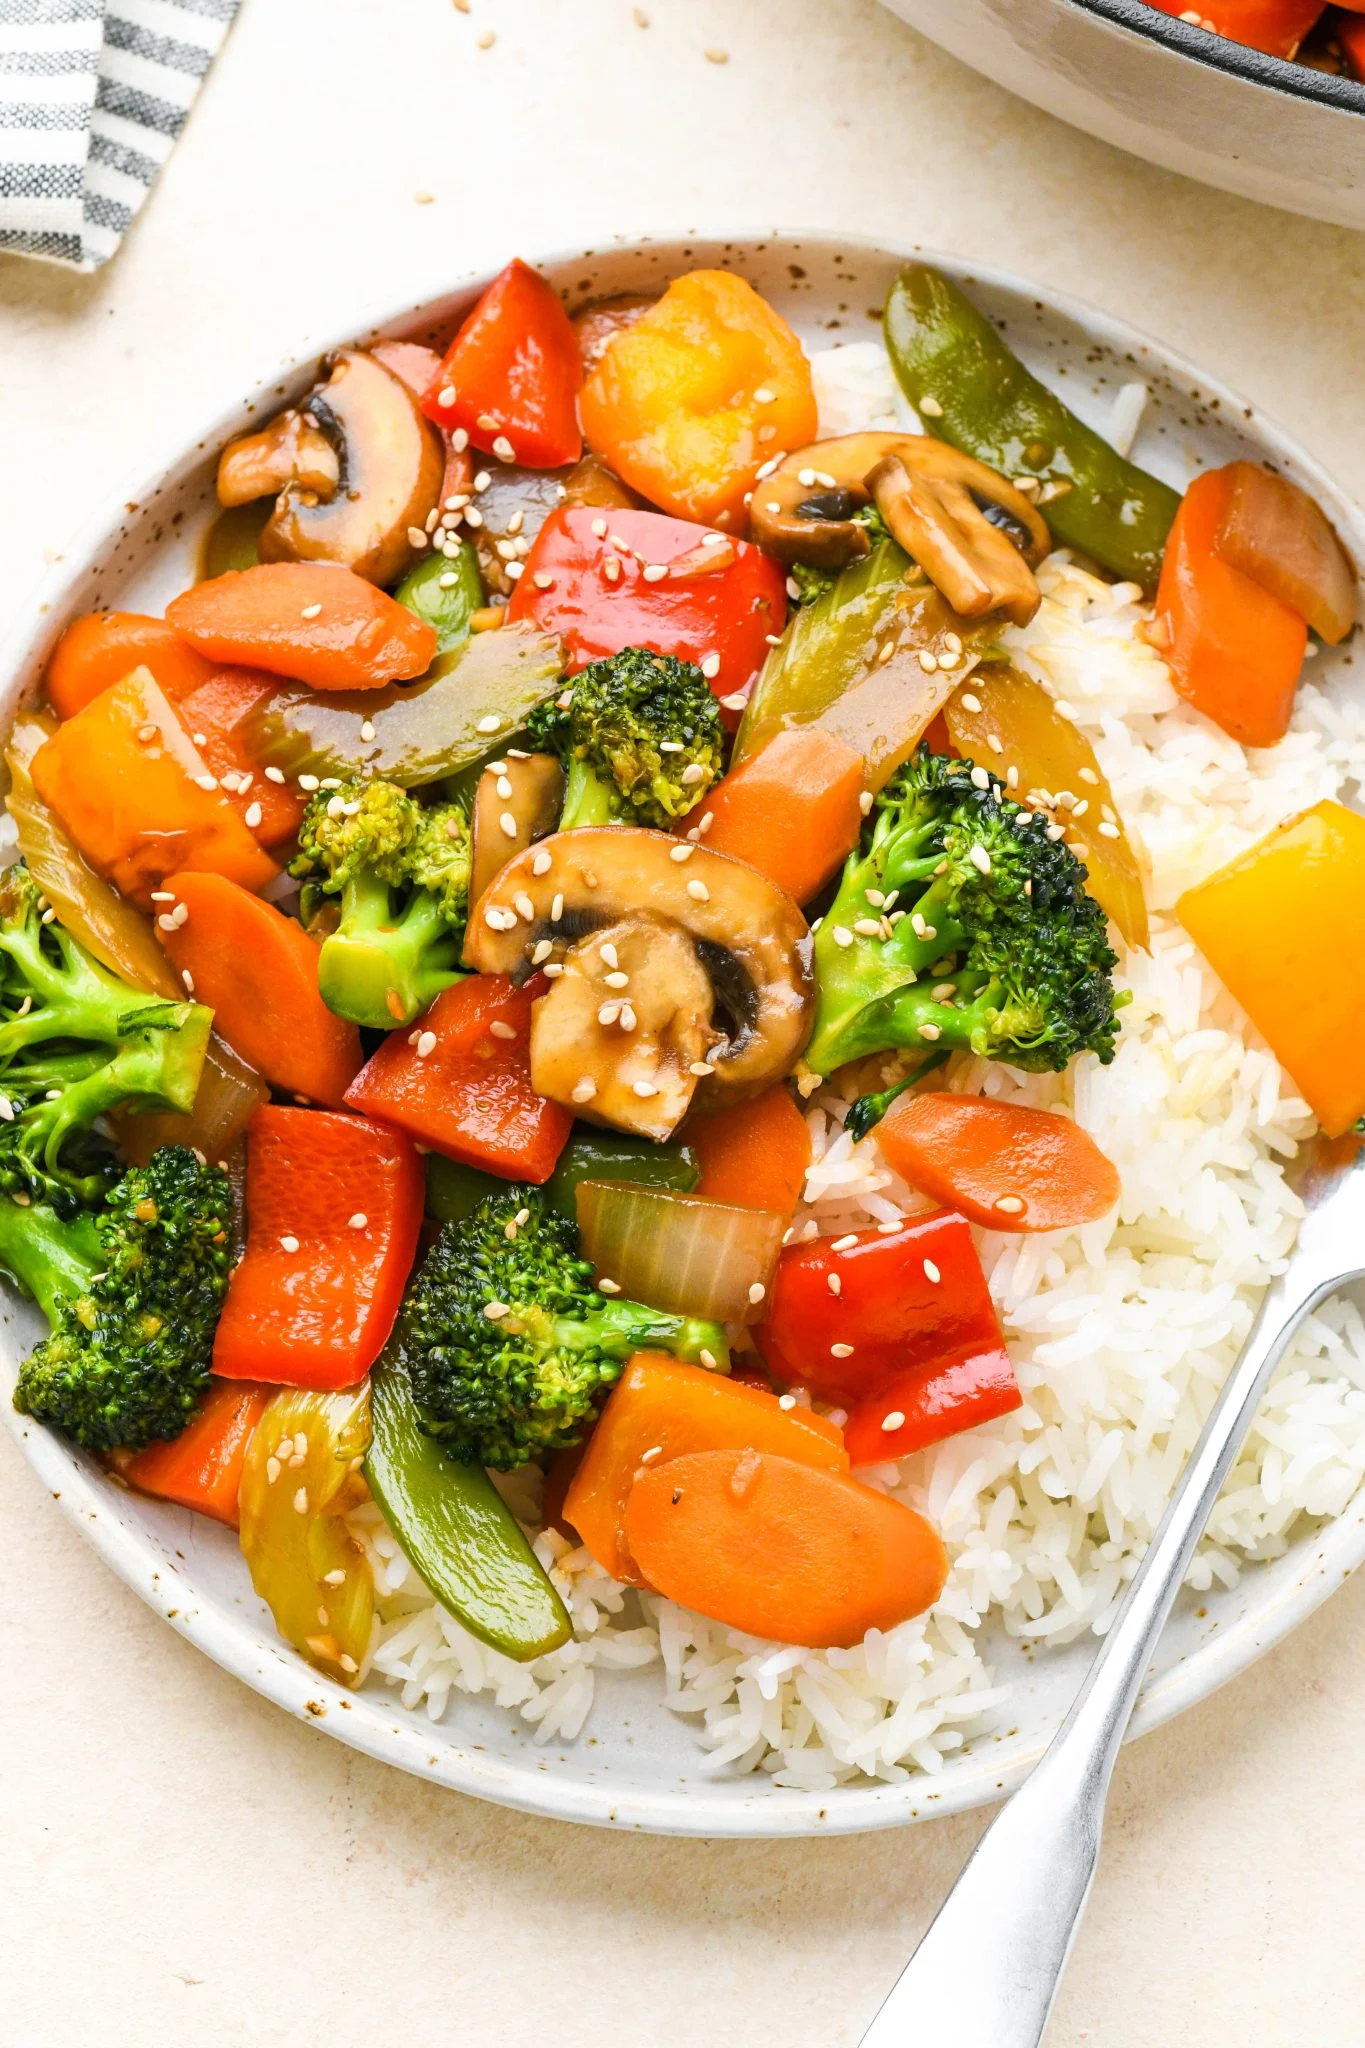 A plate of vegetables and rice.